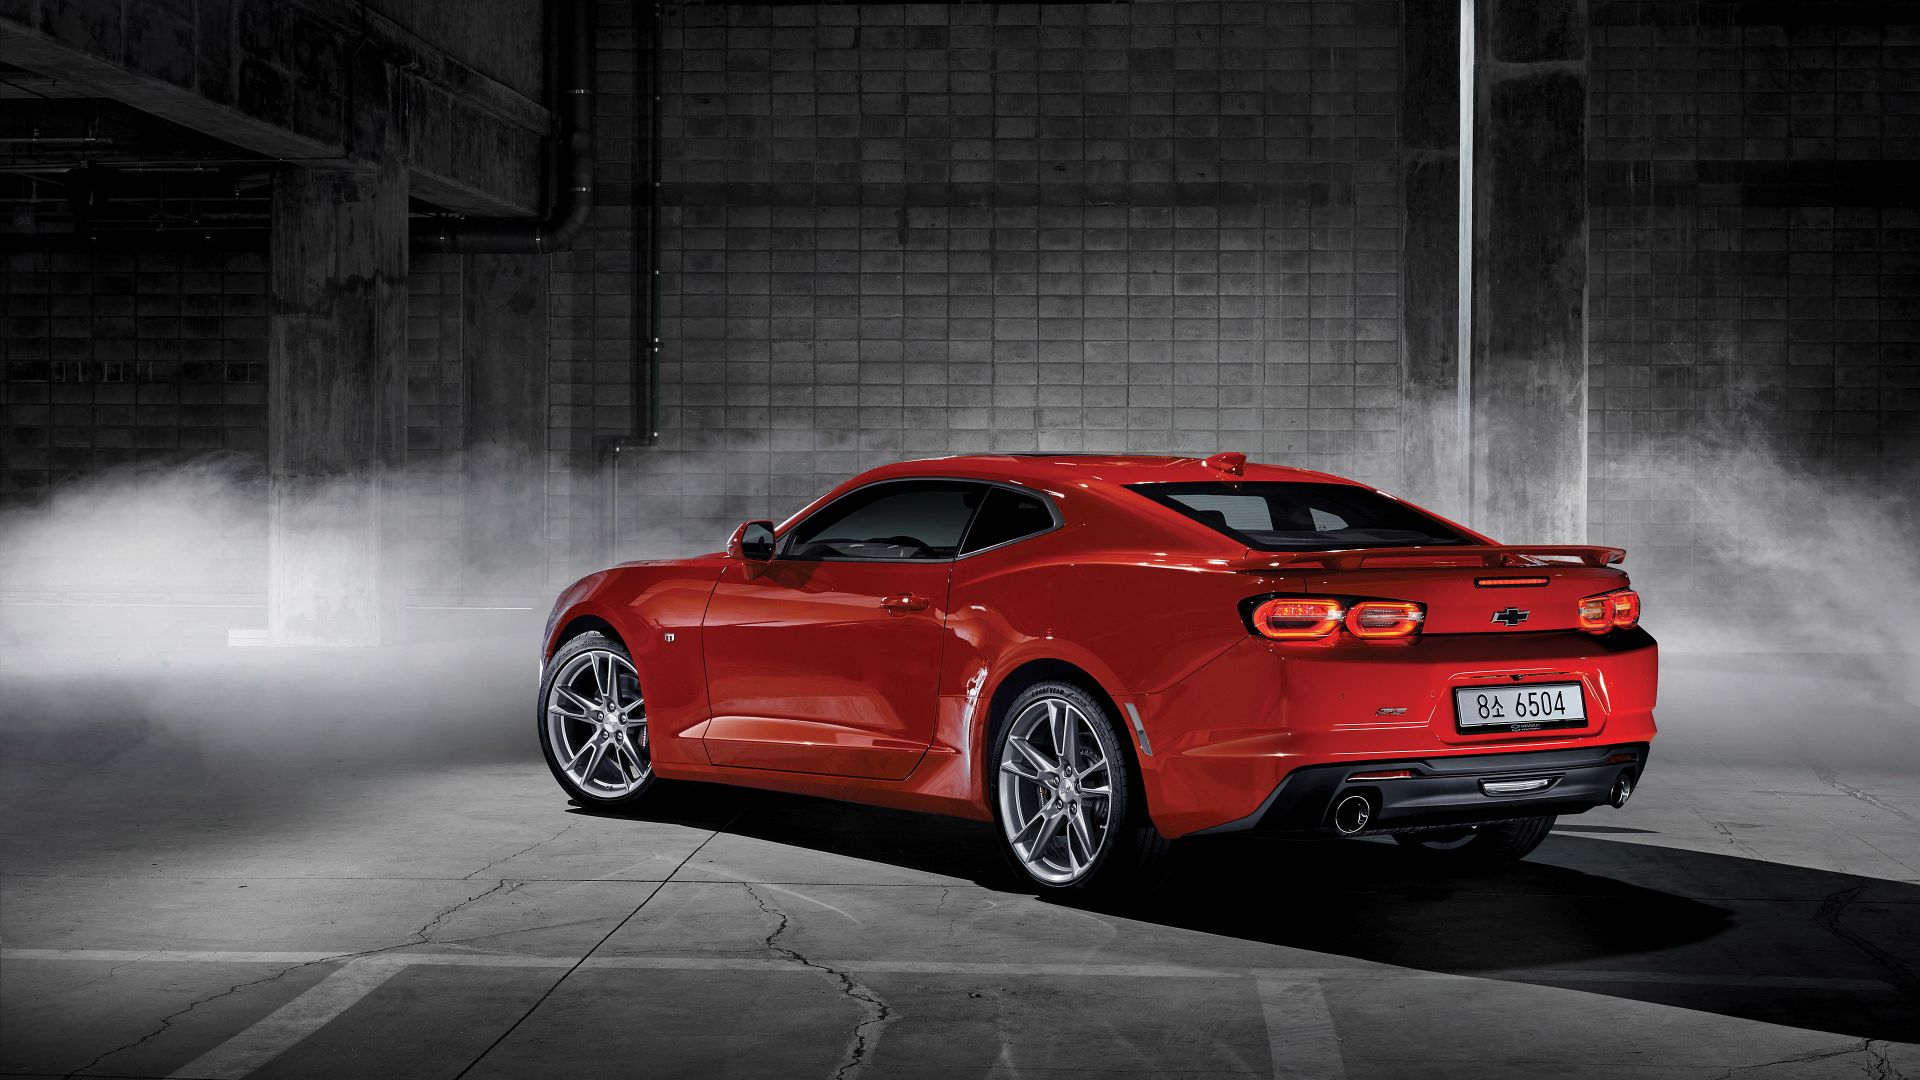 Car, red chevrolet camaro ss wallpaper, HD image, picture, background, e94a07